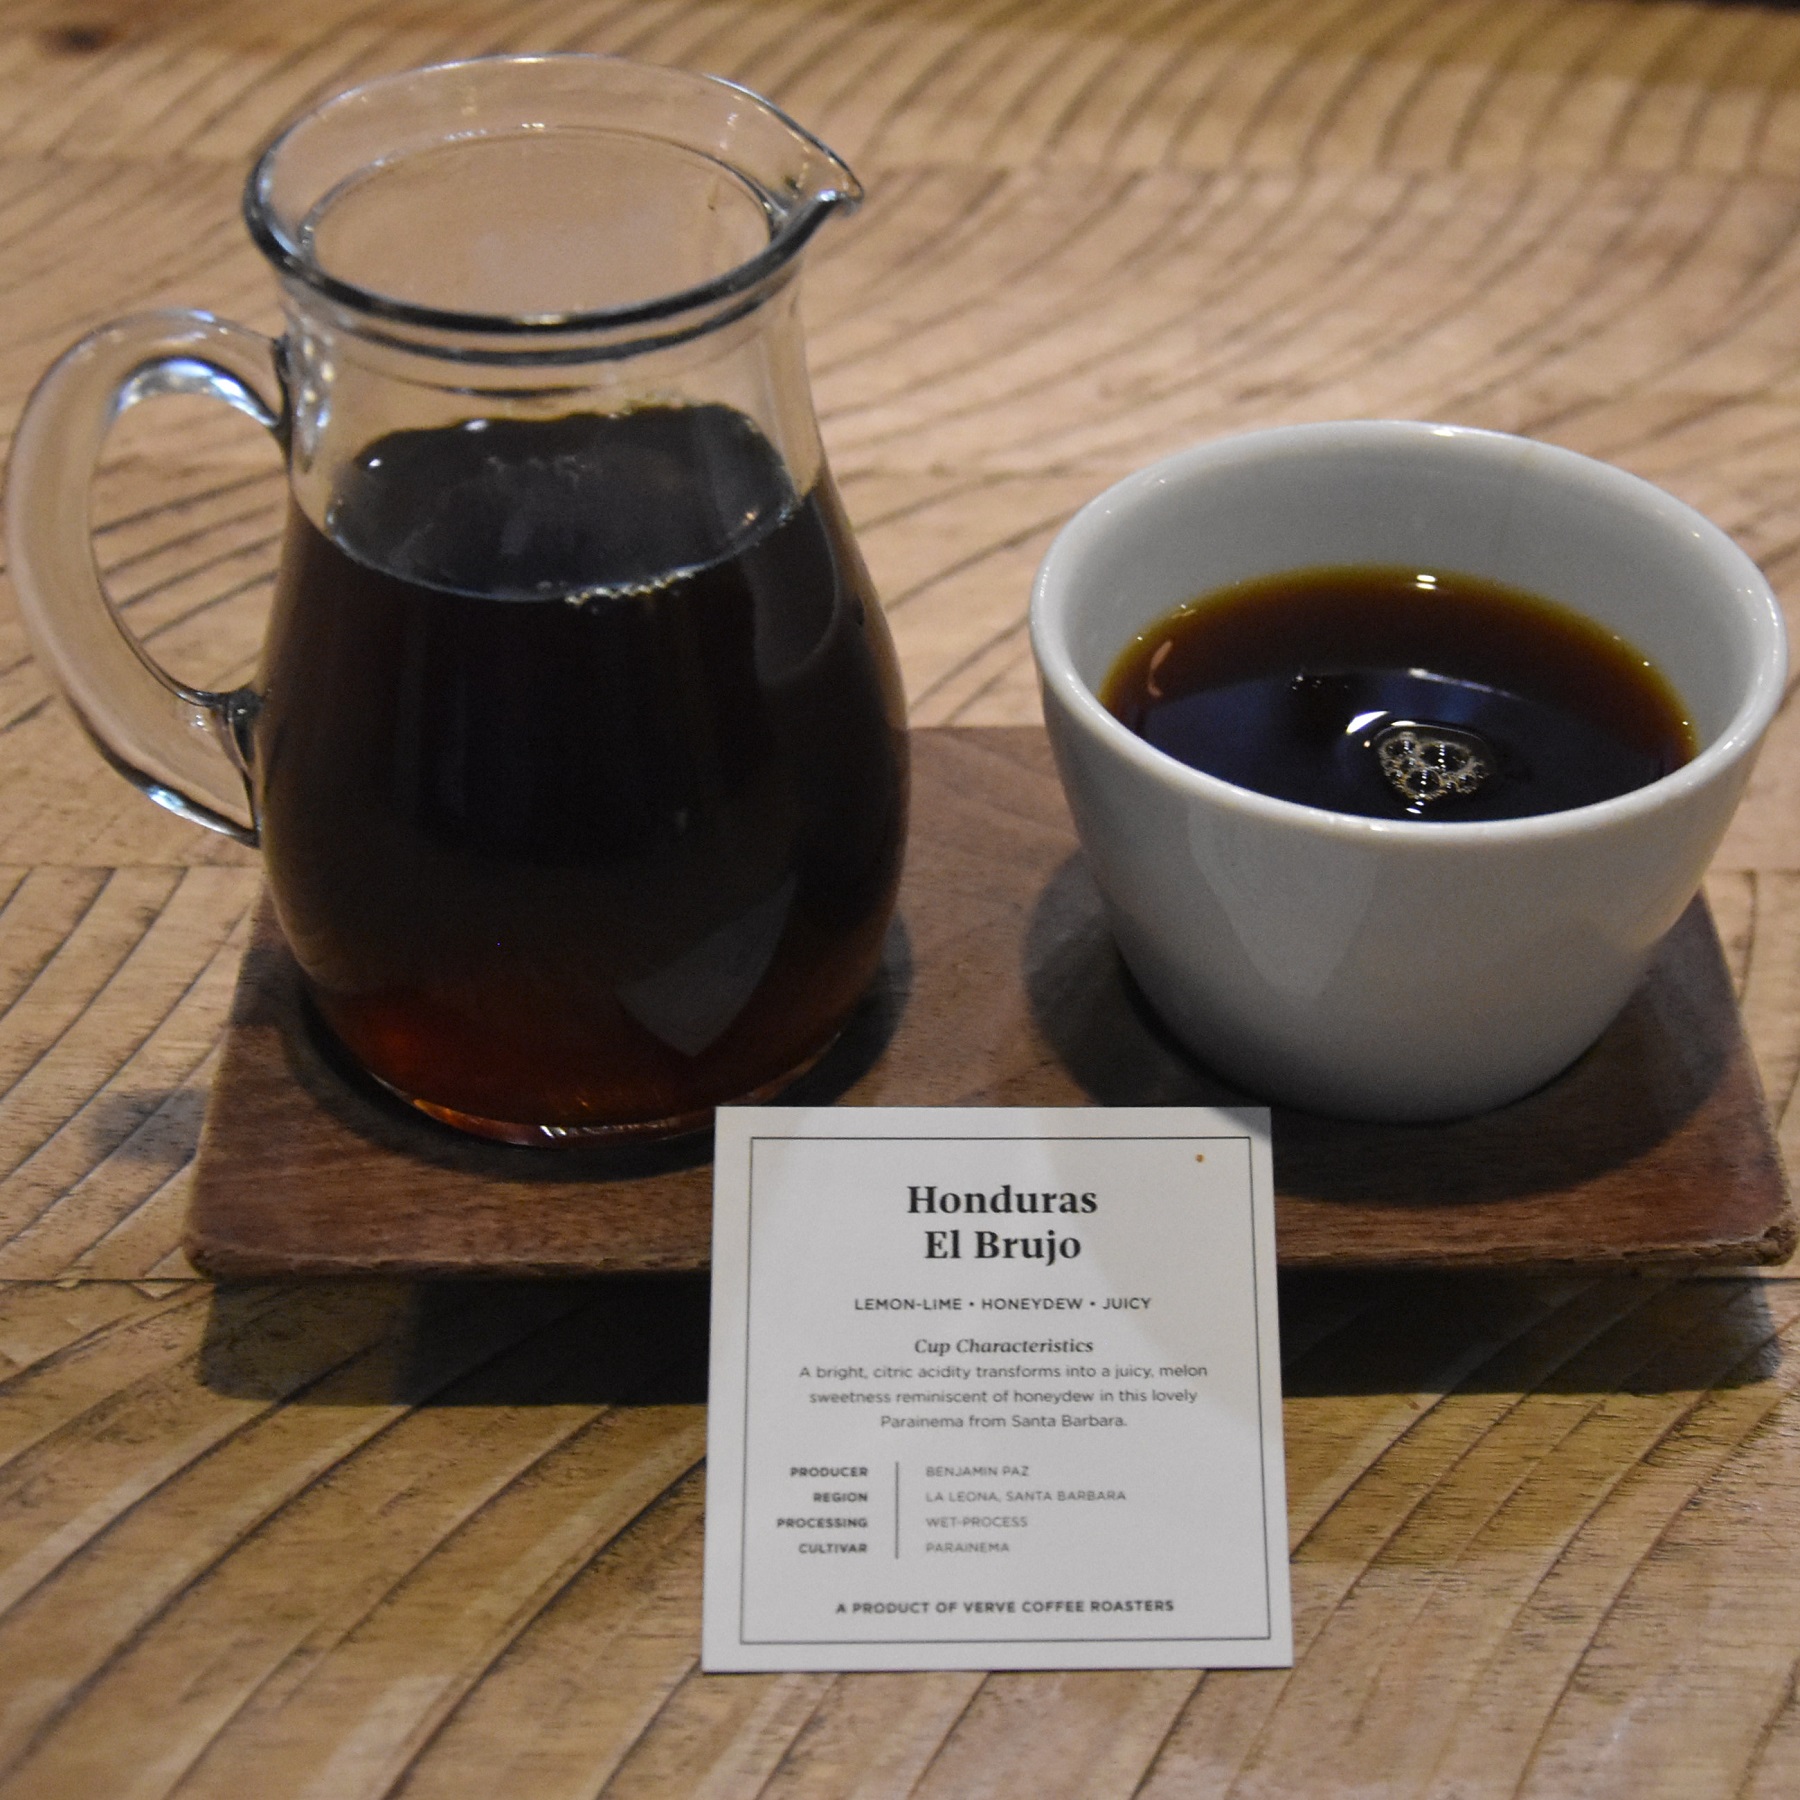 A Honduran single-origin pour-over served at Verve Coffee Roasters on Spring Street, Los Angeles, The coffee comes in a carafe, cup on the side, presented on a wooden tray with a card giving details of the beans.